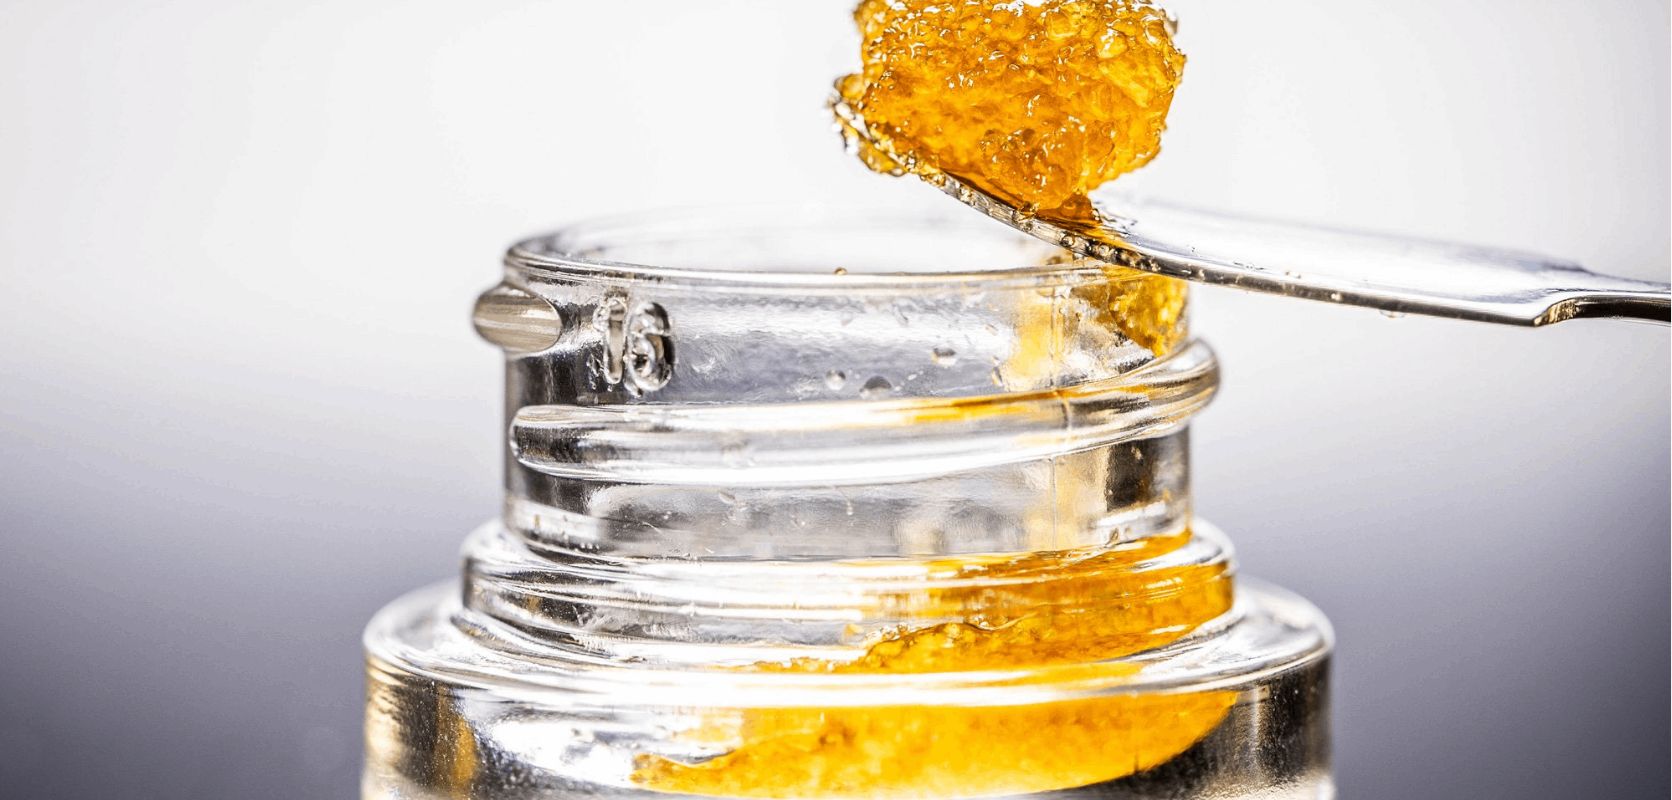 The term "weed concentrate" refers to highly-potent cannabis products such as THC diamonds, budder or badder, caviar, crumble, resin, shatter, and more. 